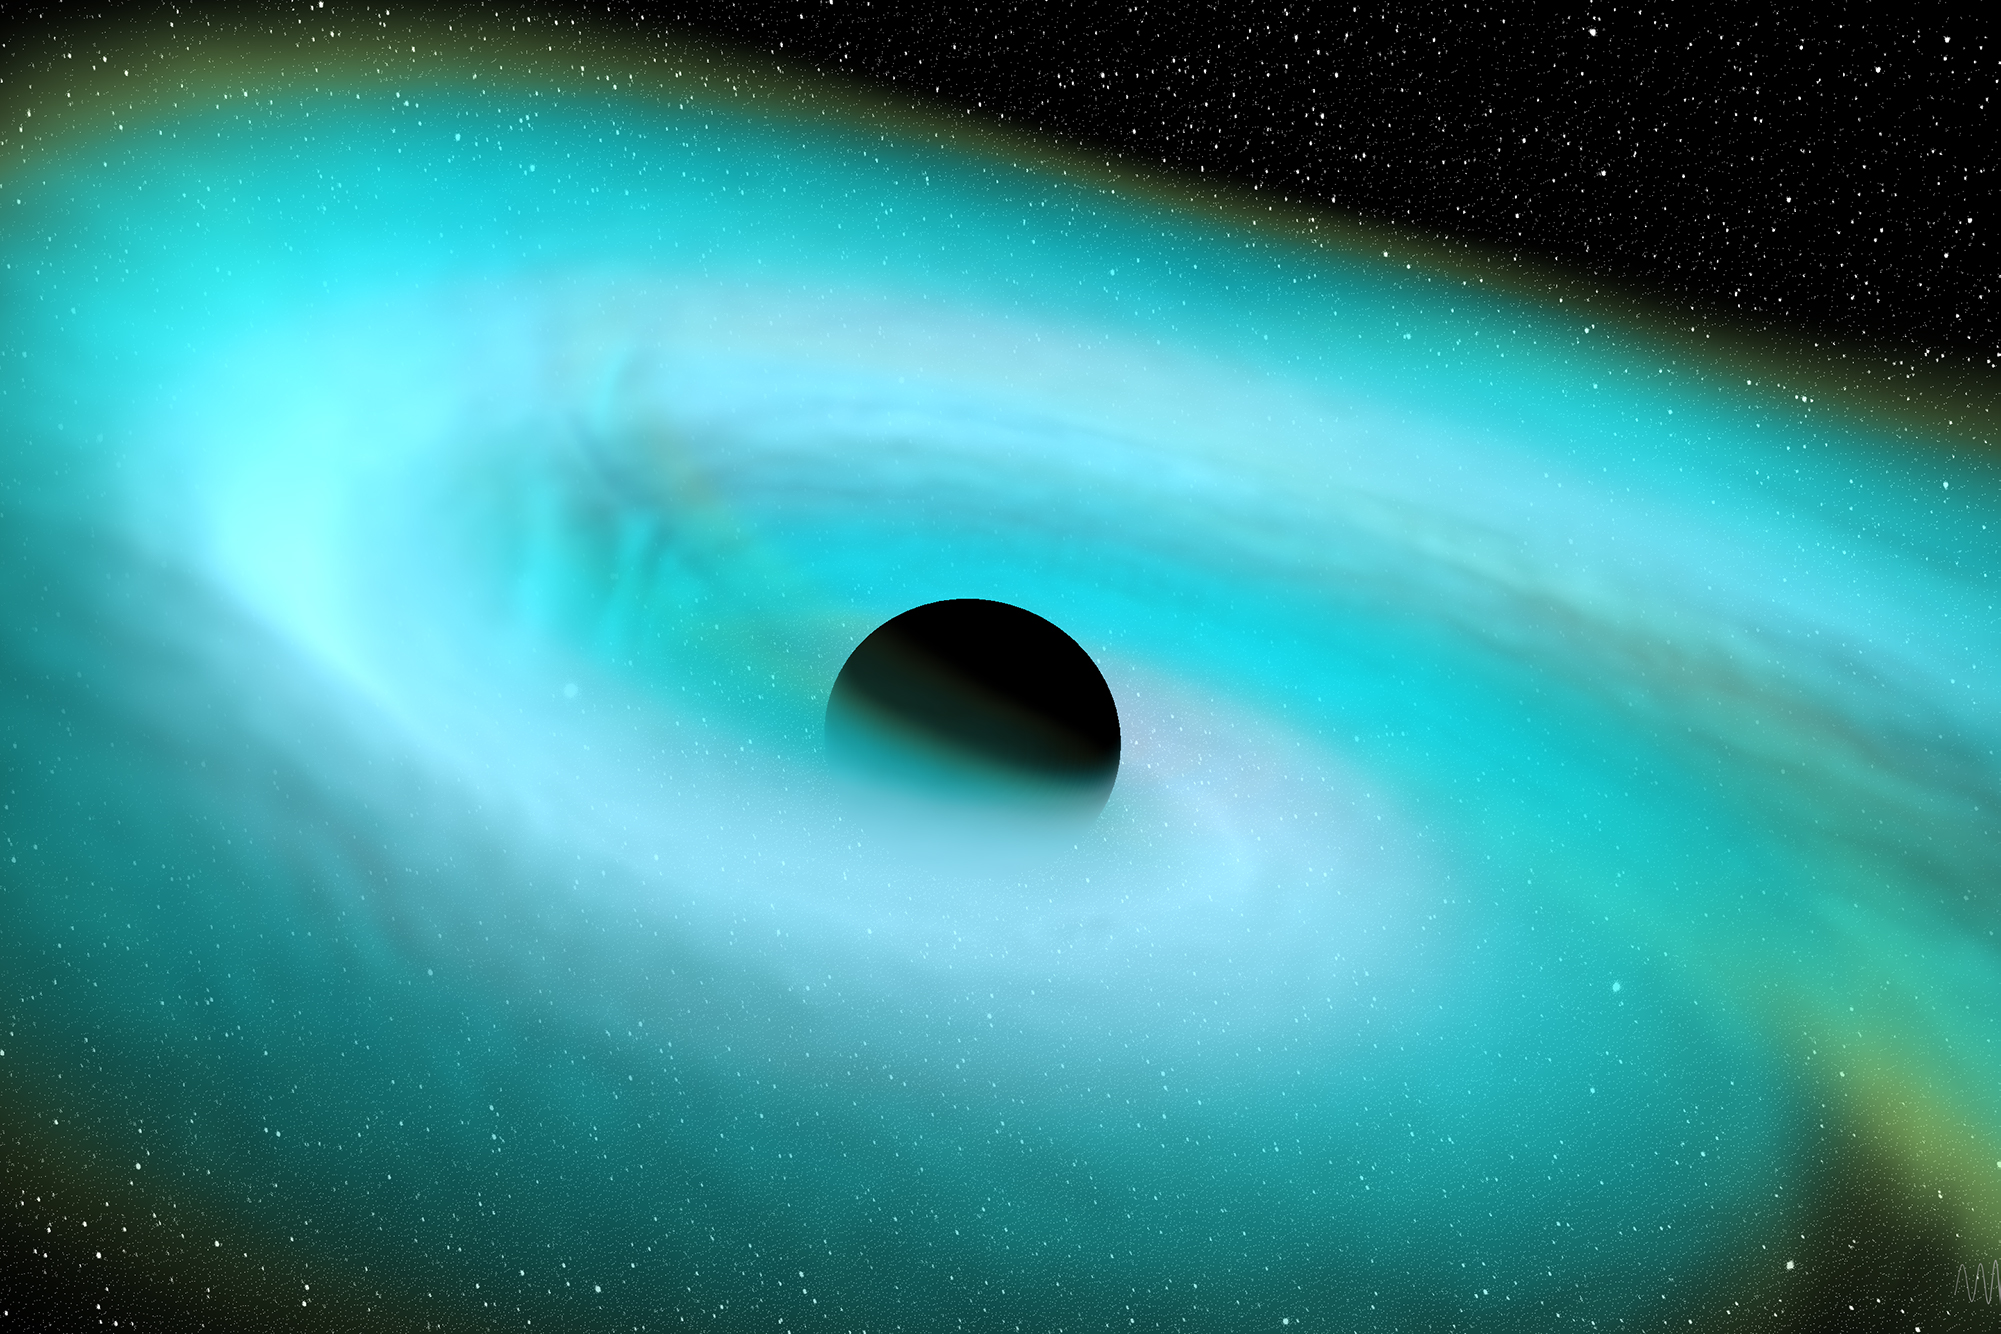 Ligo And Virgo Detect Rare Mergers Of Black Holes With Neutron Stars For The First Time Mit 